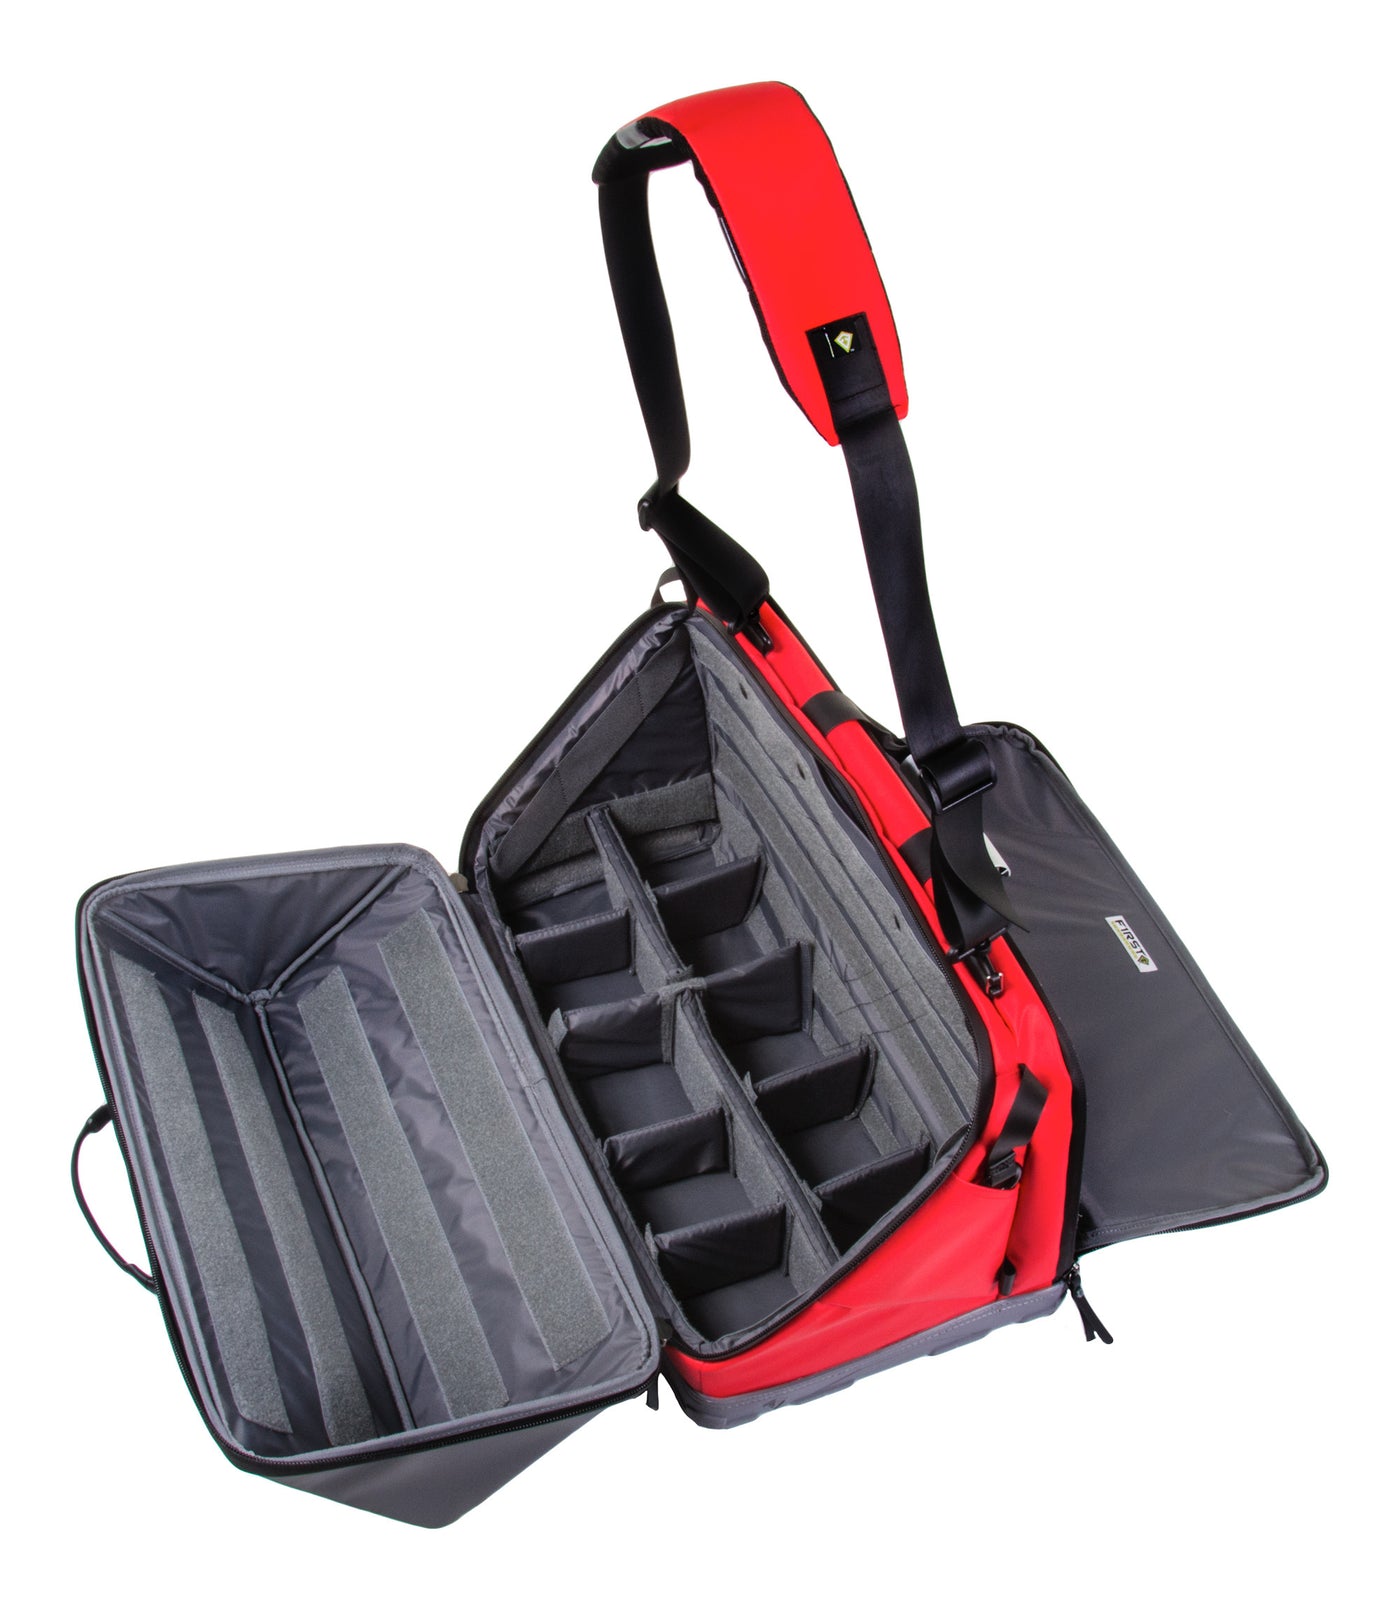 Open Top of Large Jump Bag in Red